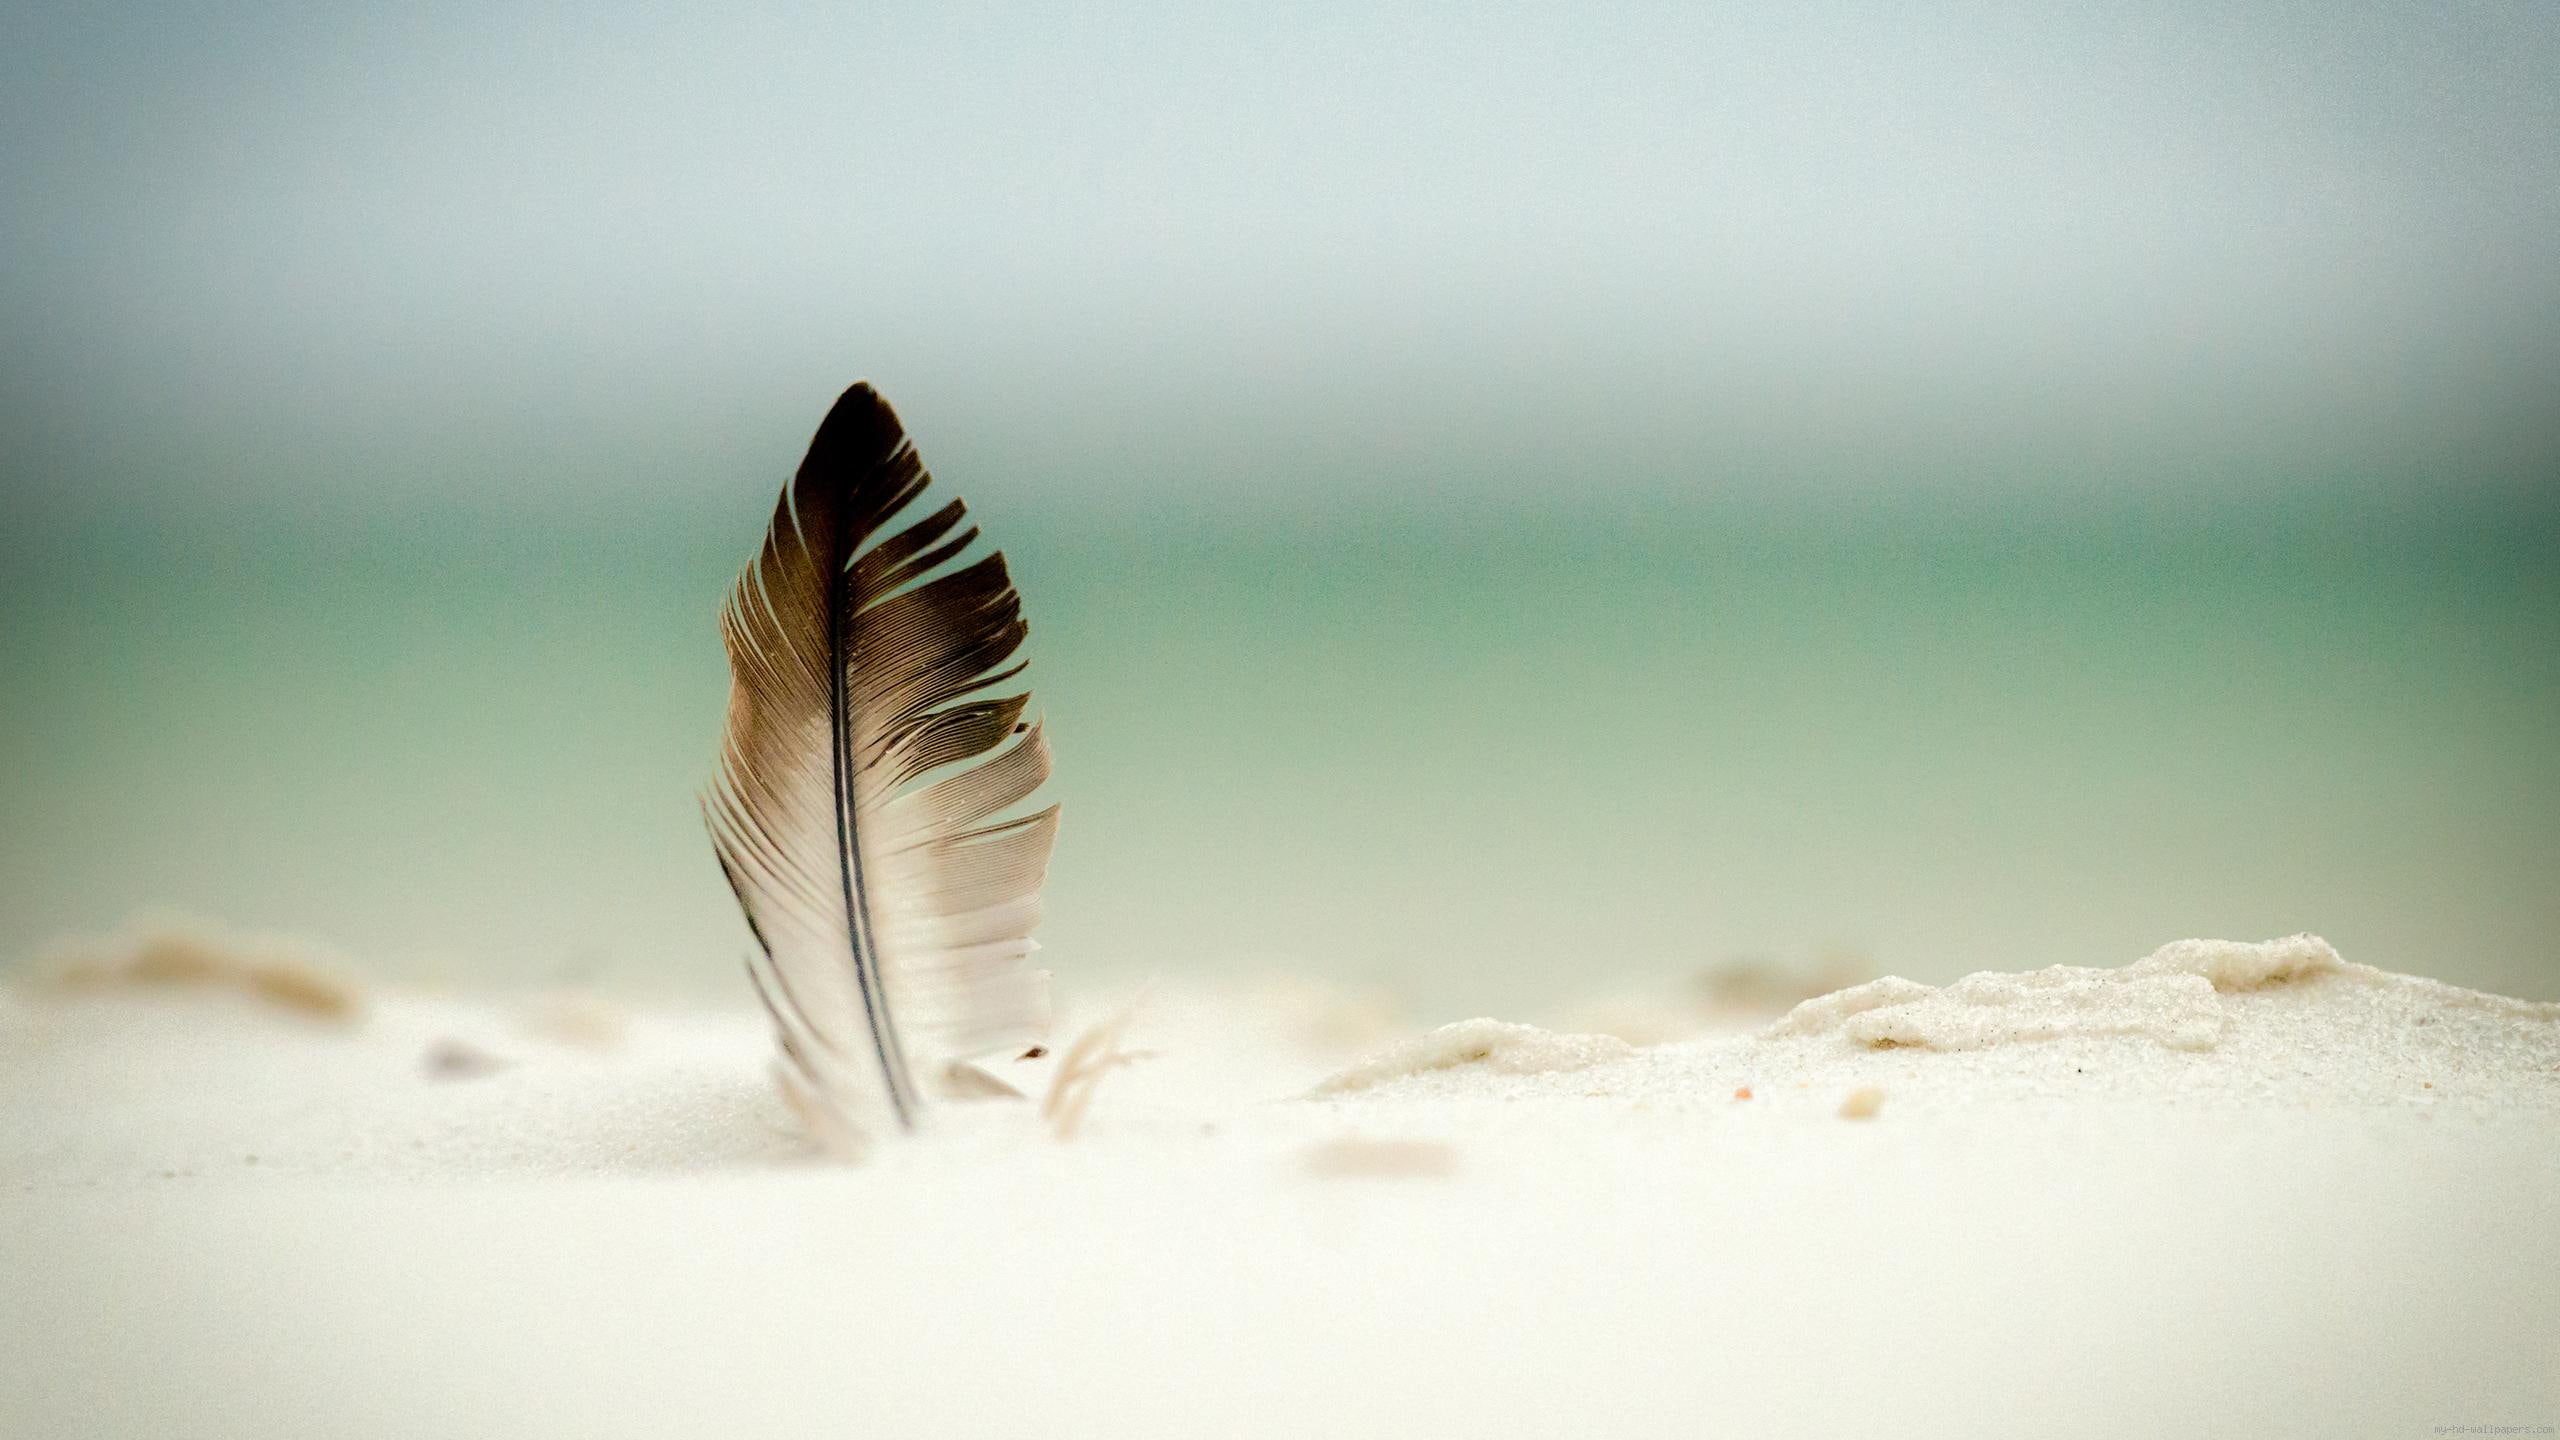 Plume stuck in the sand, white and black feather, nature